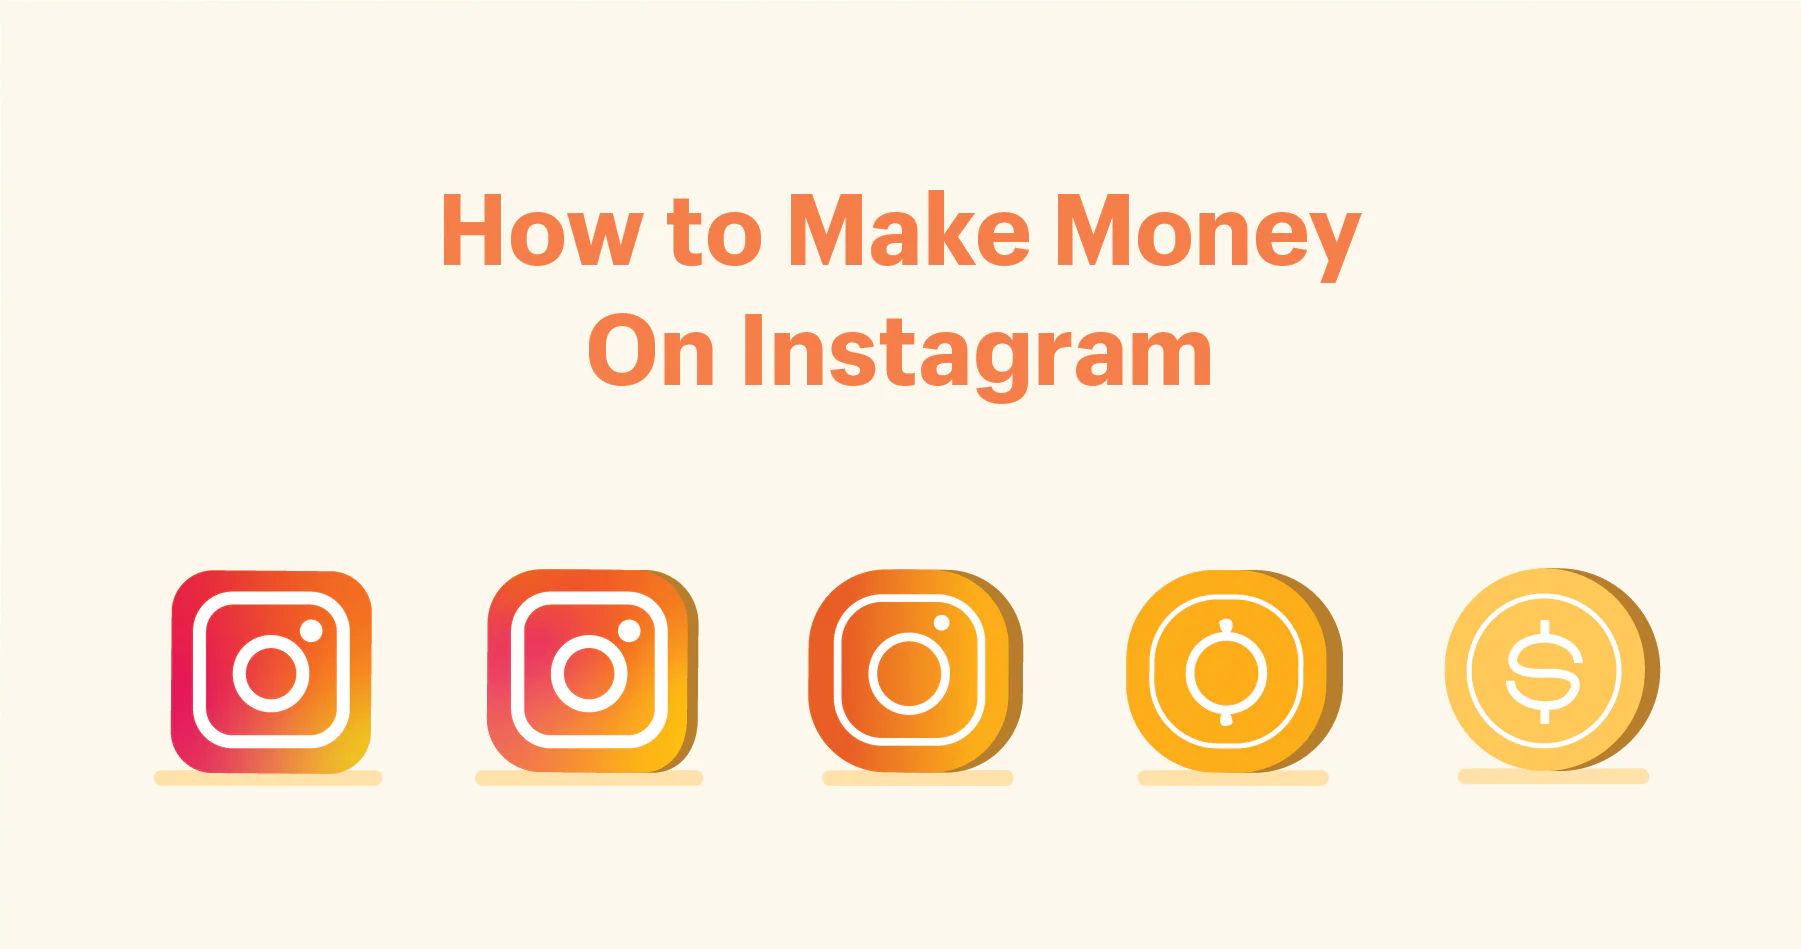 How to make money on Instagram: Teaching and Earning